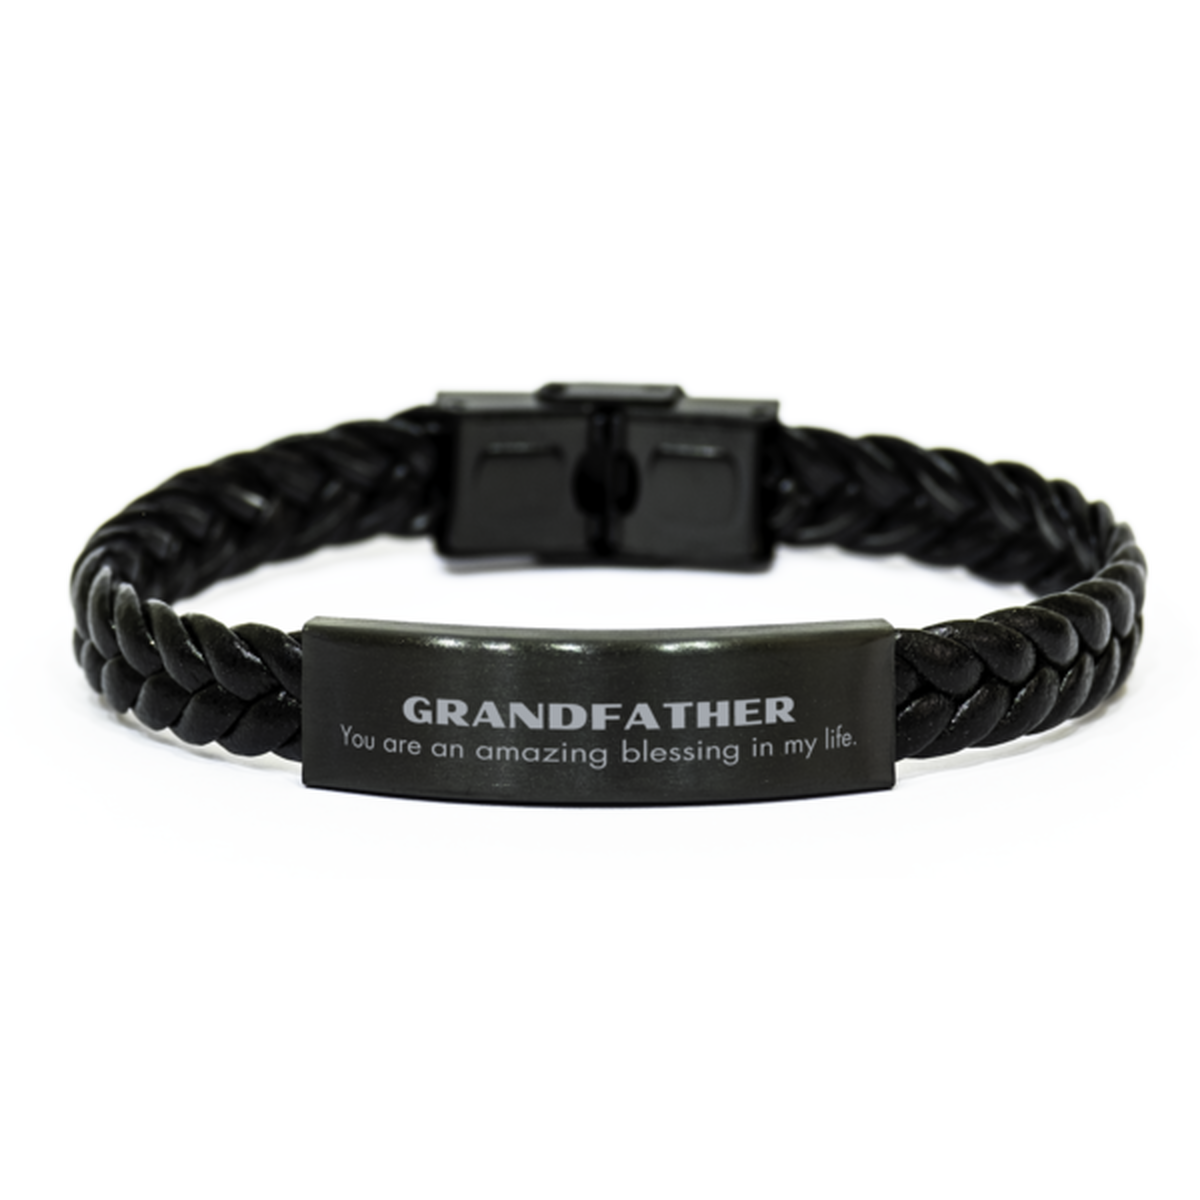 Grandfather Braided Leather Bracelet, You are an amazing blessing in my life, Thank You Gifts For Grandfather, Inspirational Birthday Christmas Unique Gifts For Grandfather